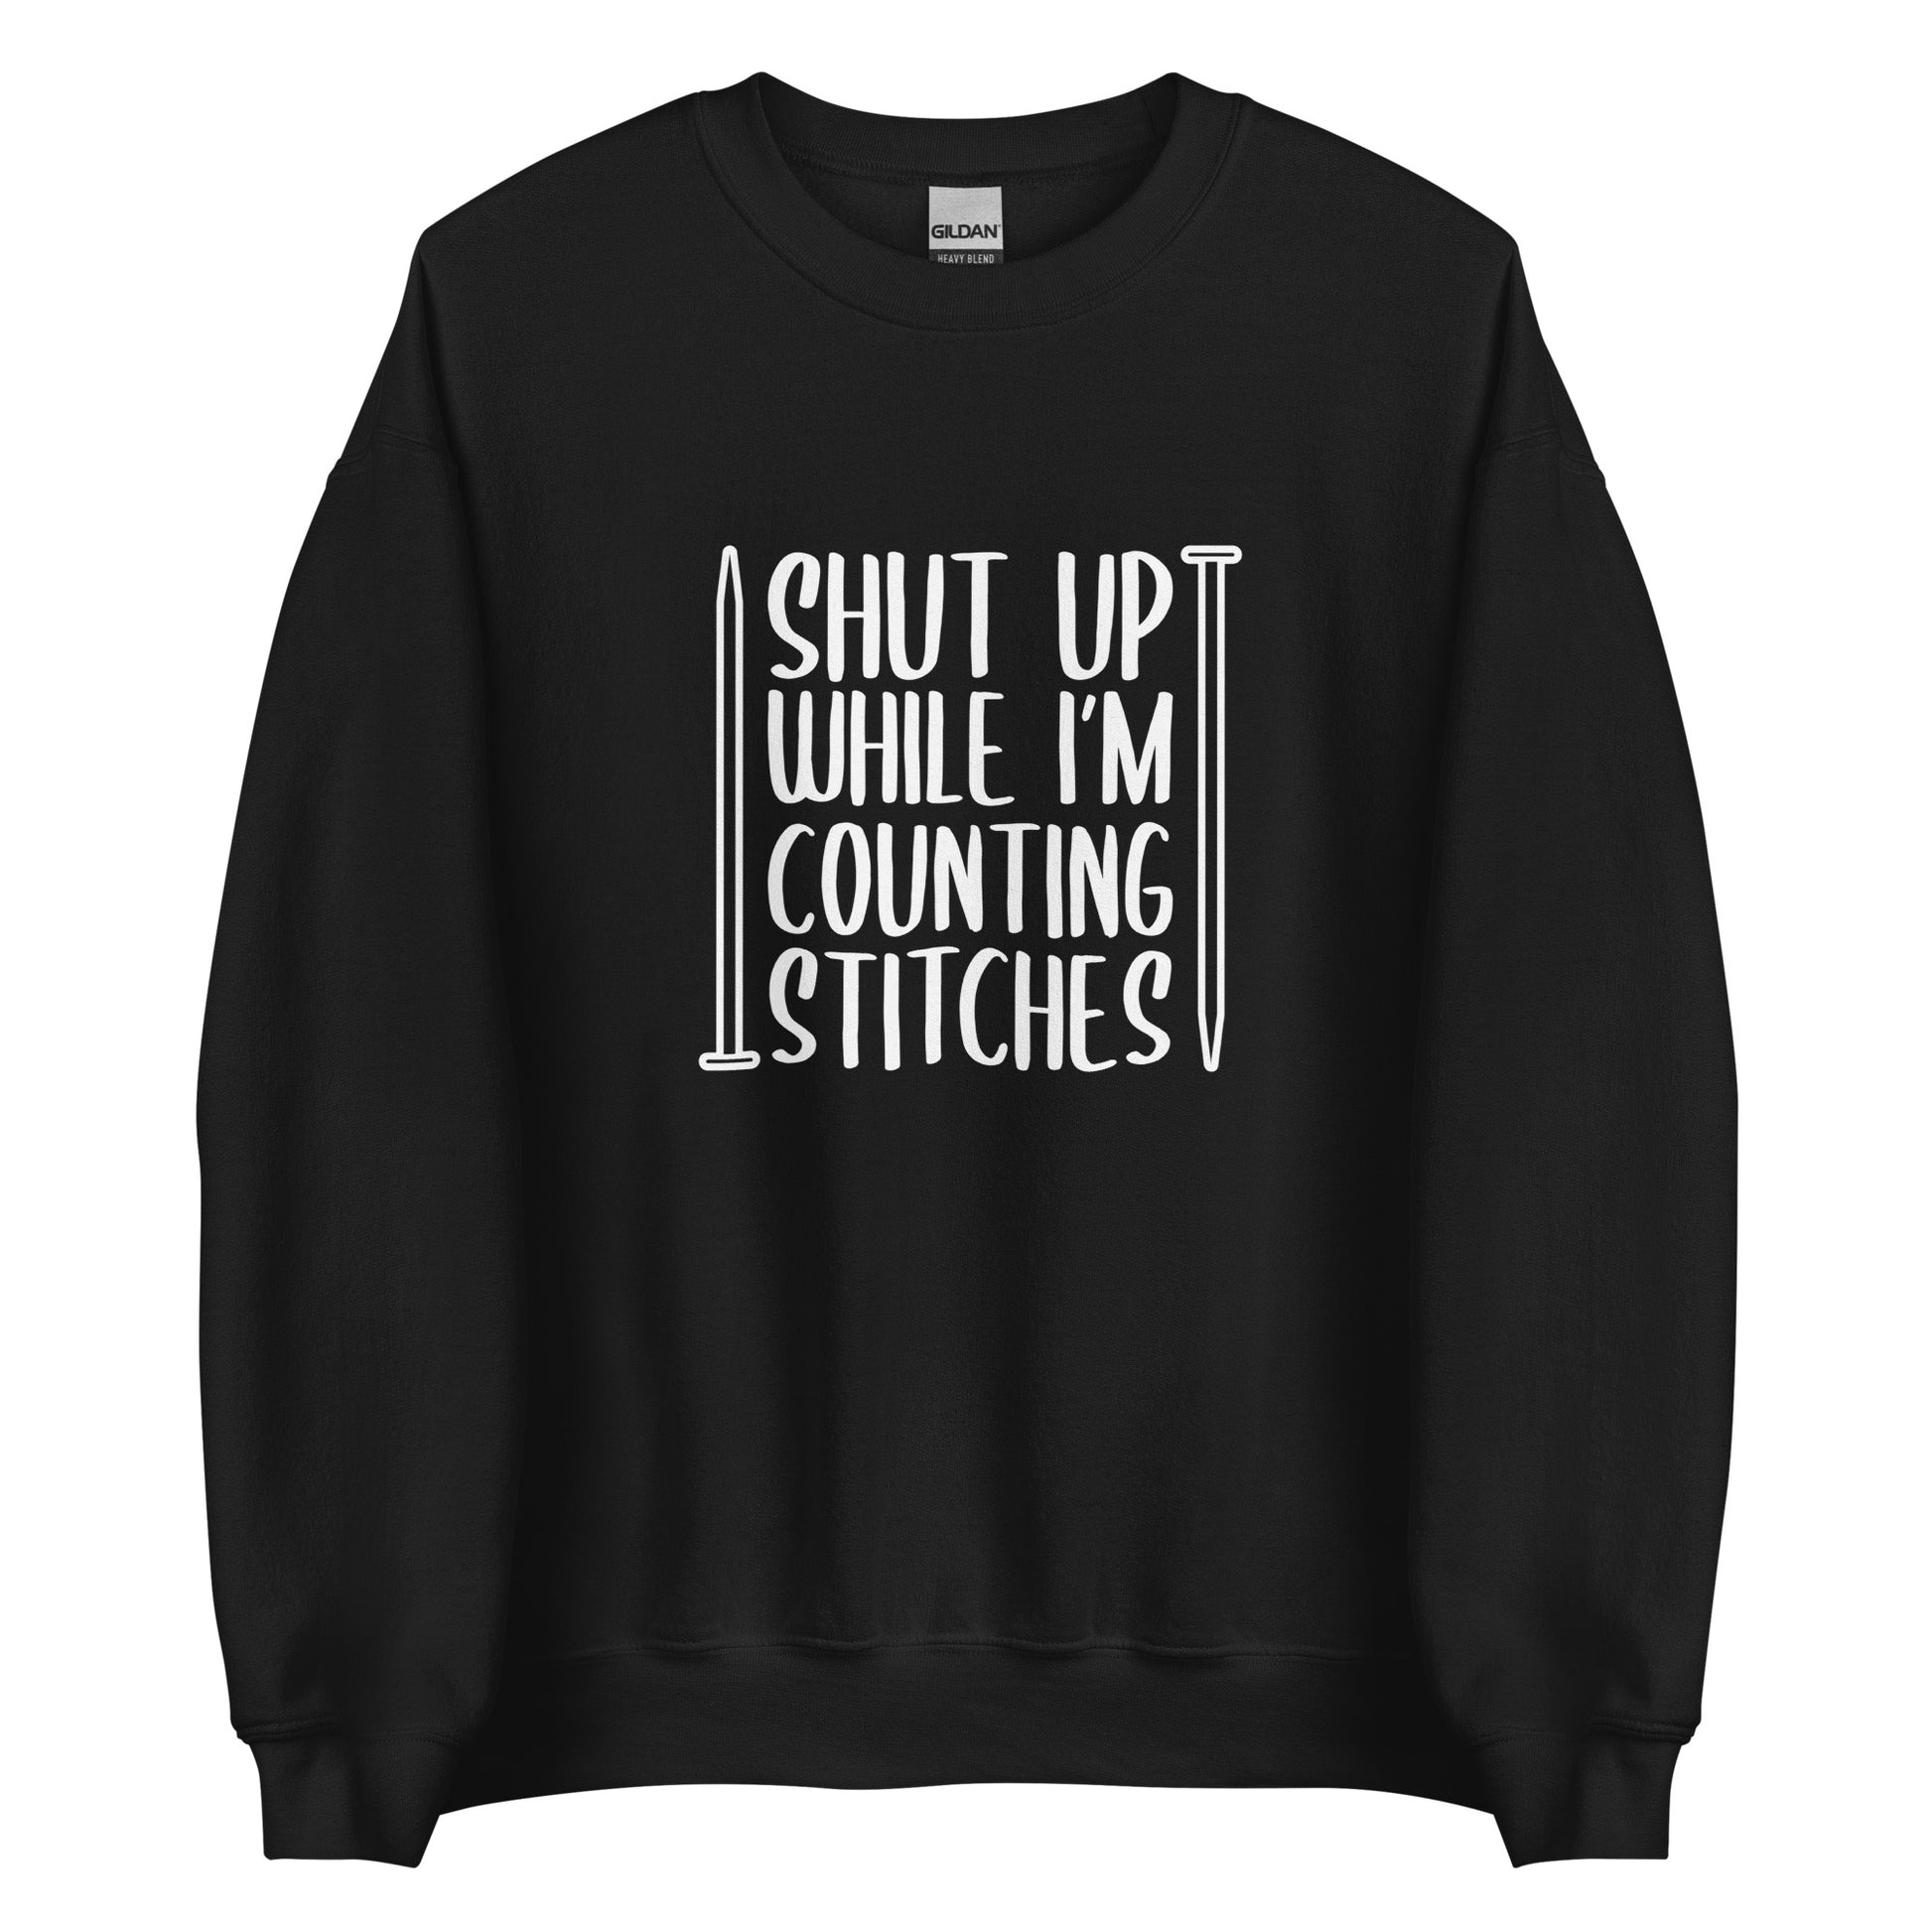 A black crewneck sweatshirt with white text surrounded by two knitting needles. The text reads "Shut up while I'm counting stiches".